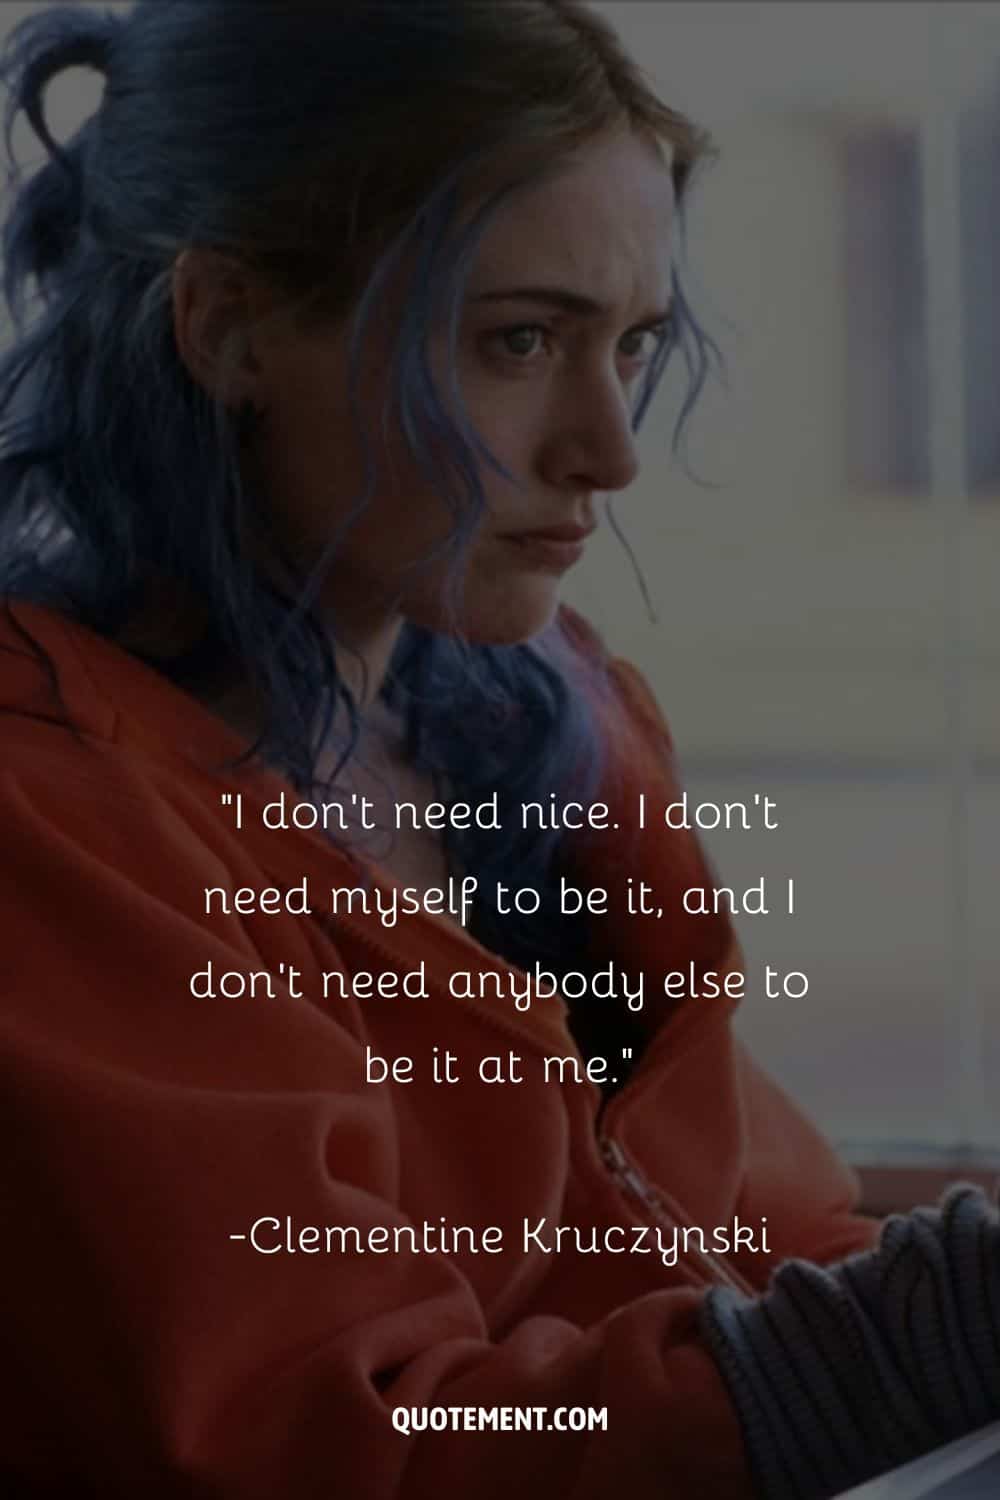 Eccentric Clementine from Eternal Sunshine of the Spotless Mind.